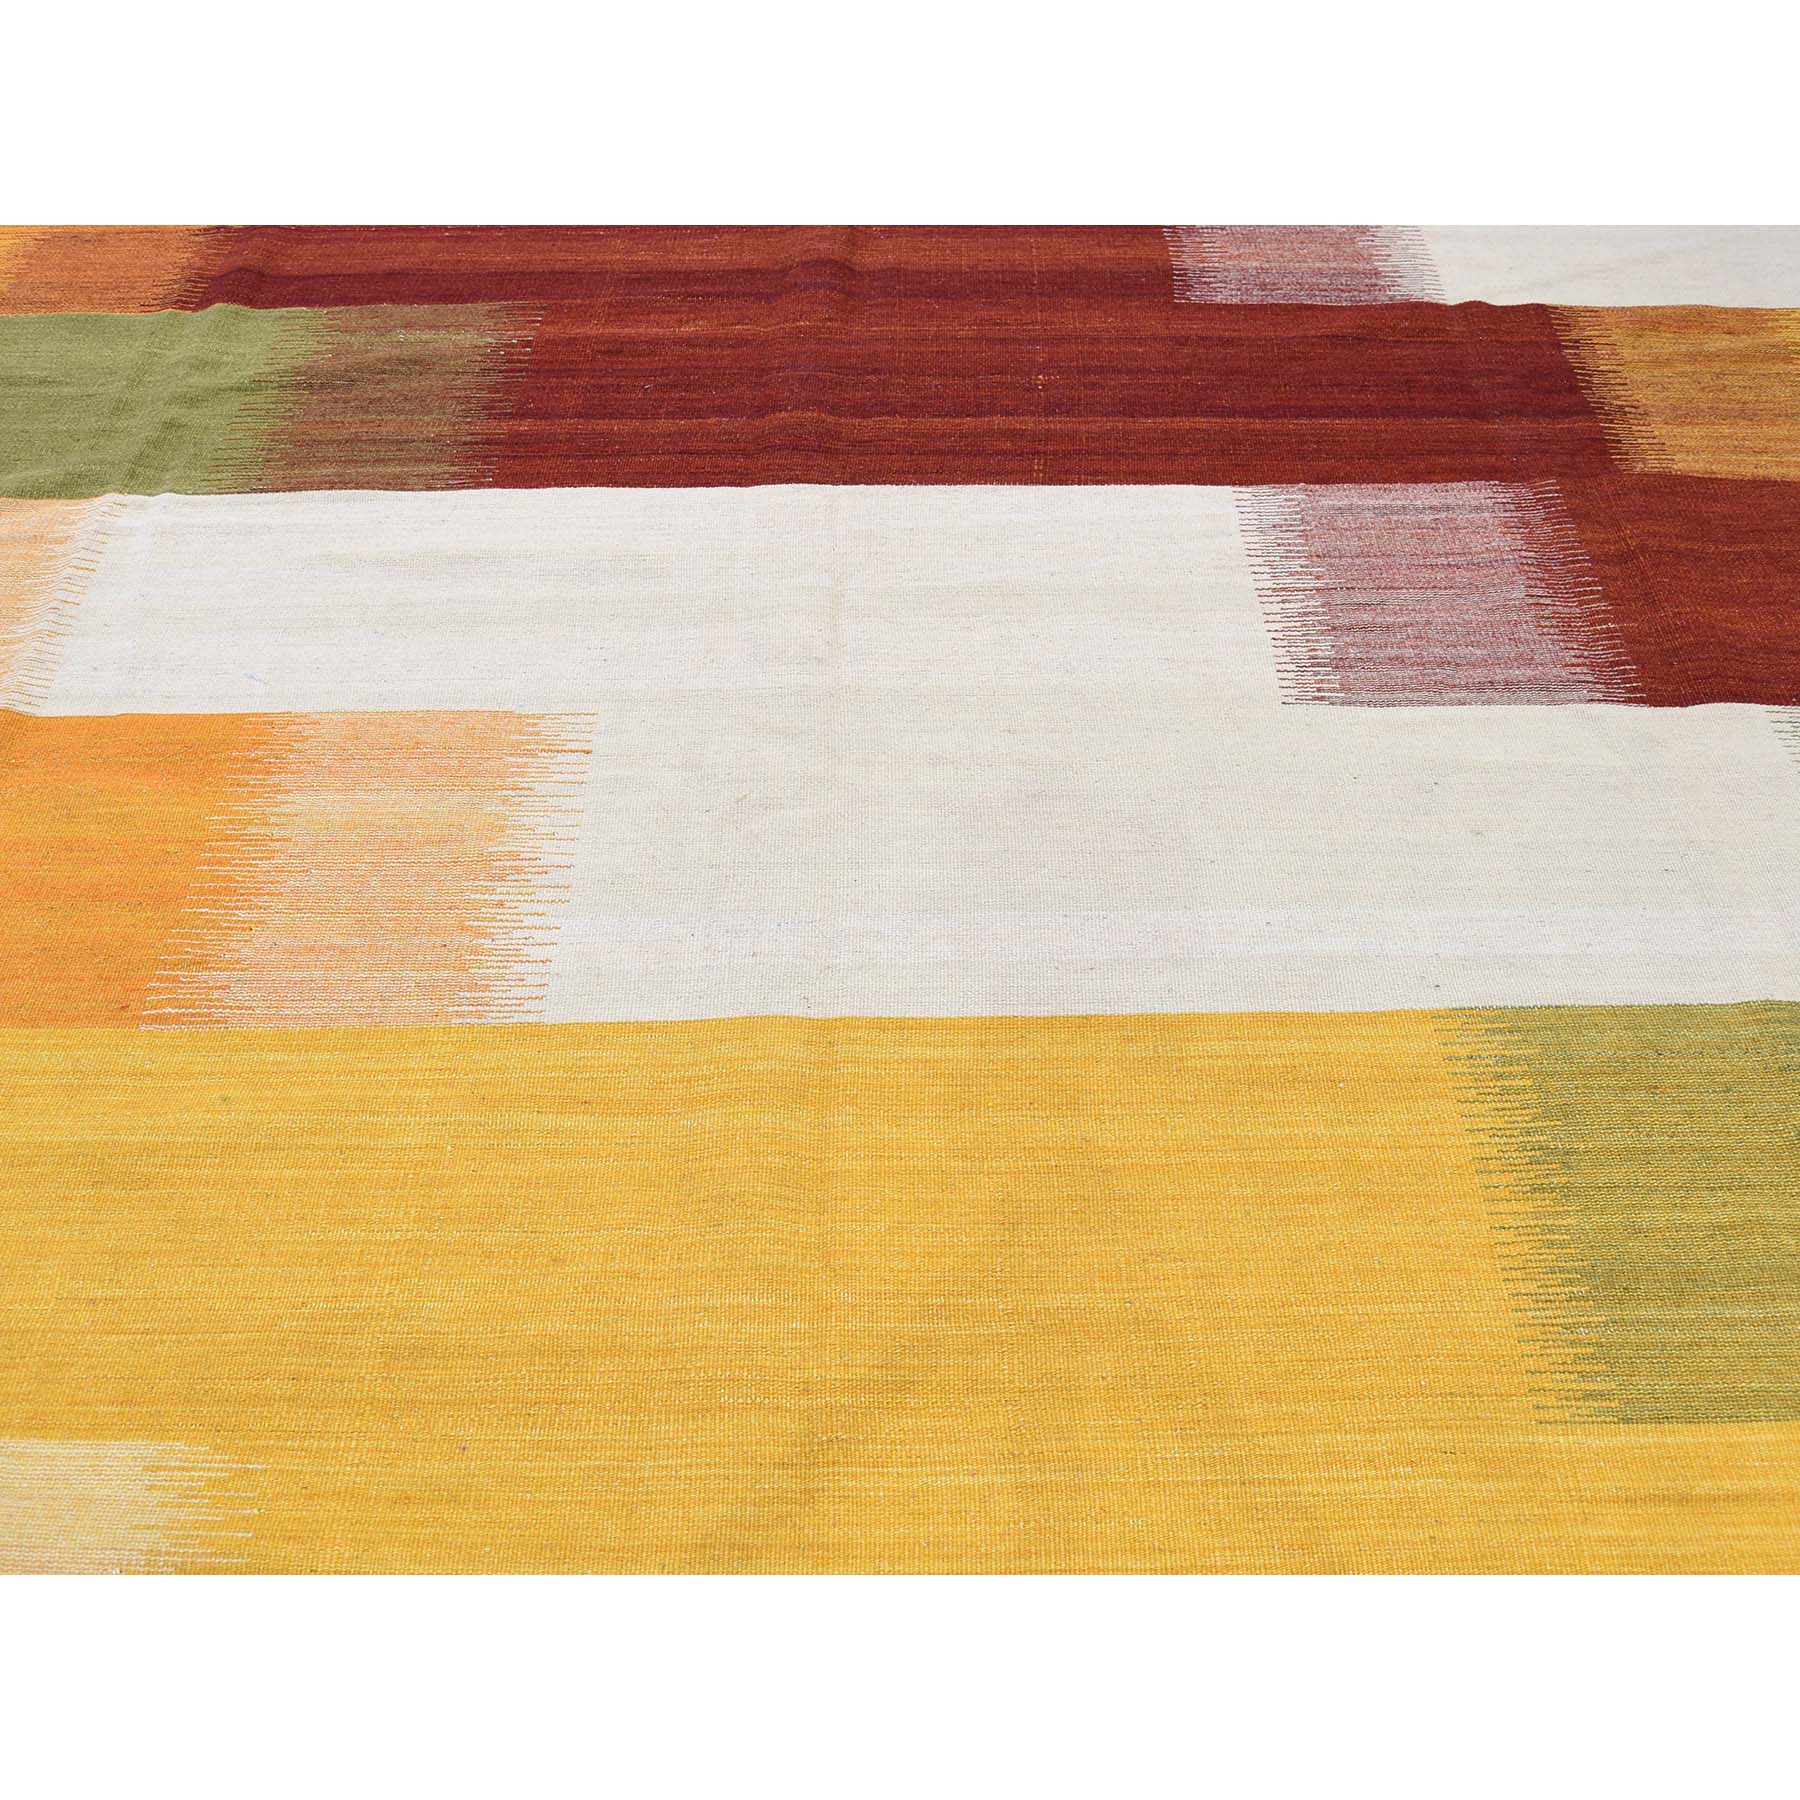 9-x12-3  Hand Woven Flat Weave Dazzle Design Durie Kilim Reversible Rug 